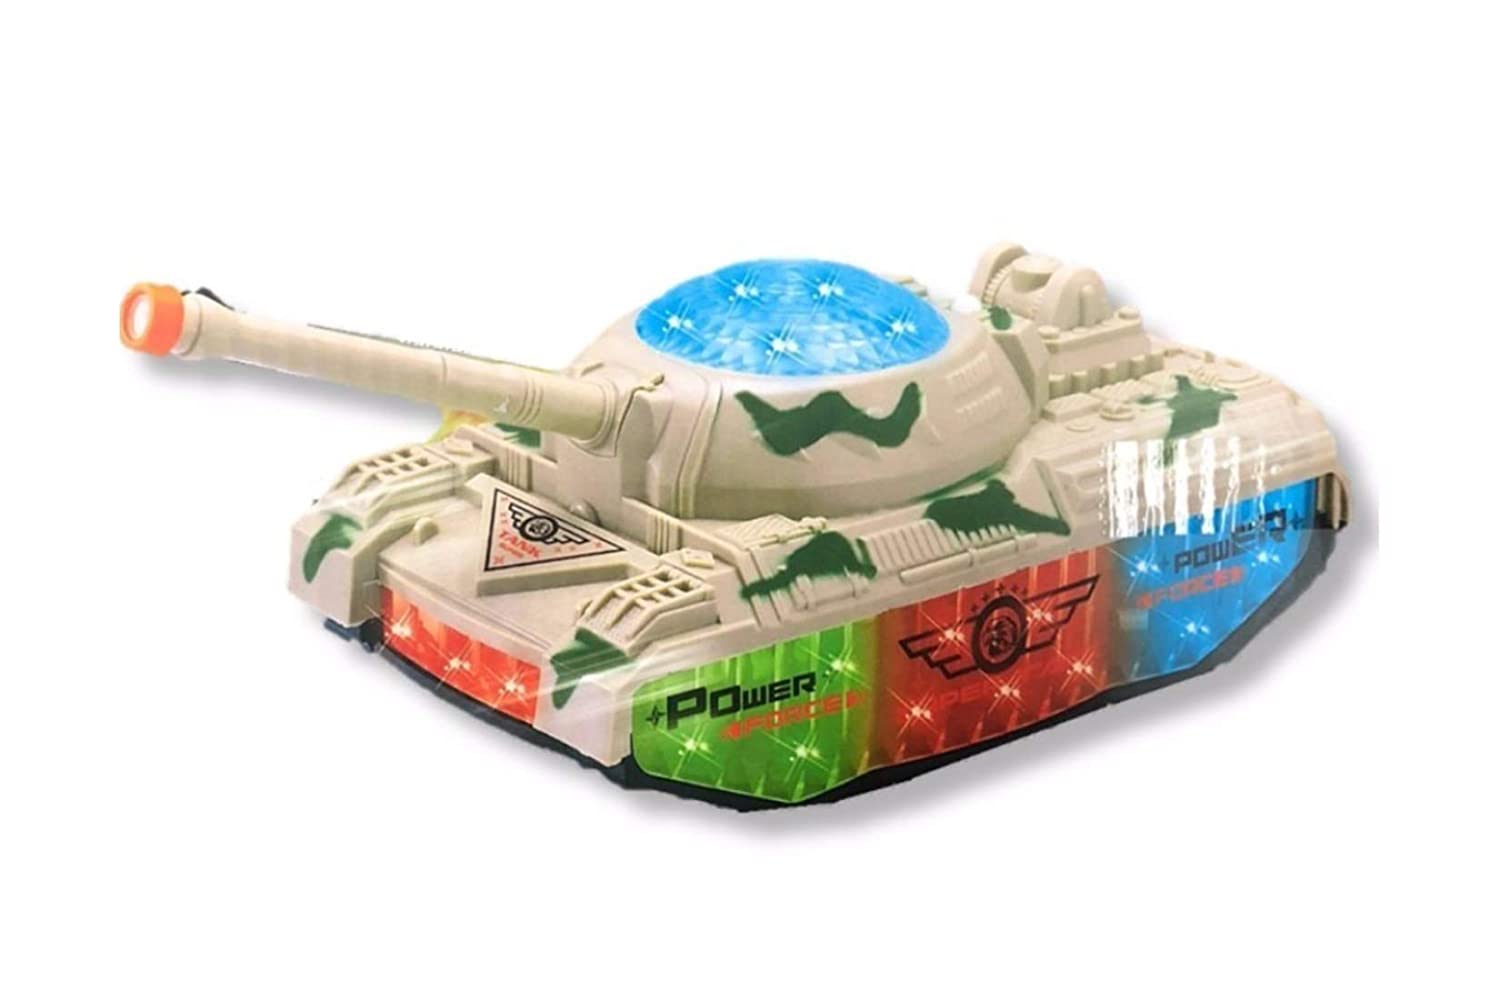 Bump & Go Battle Tank with Flashing Lights and Sound Toy for Kids